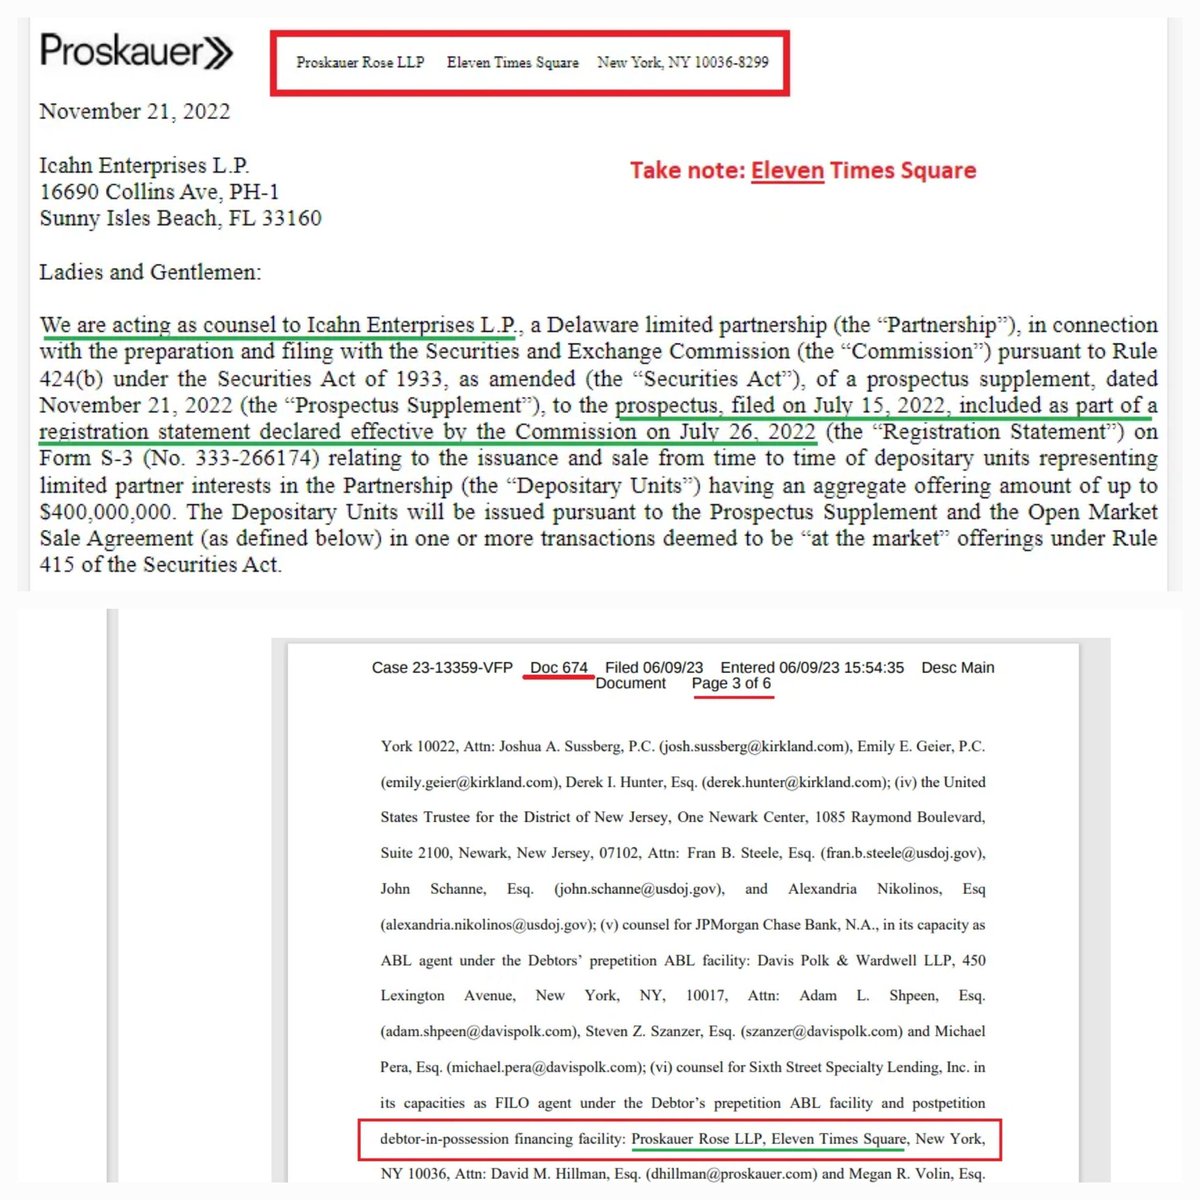 ‼️BREAKING $BBBY ACQUISITION

✅ SIXTH STREET HAS PROVIDED THE DIP FACILITY

✅ SIXTH STREET IS UNDER DIRECTION OF PROSKAUER ROSE

✅ PROSKAUER ROSE WORKS FOR $IEP = REAL STALKING HORSE, PENDING ANNOUNCEMENT

THE DD IS BEING PROVEN TRUE 👇reddit.com/r/edwinbarnesc…

#GMERICA #MOASS